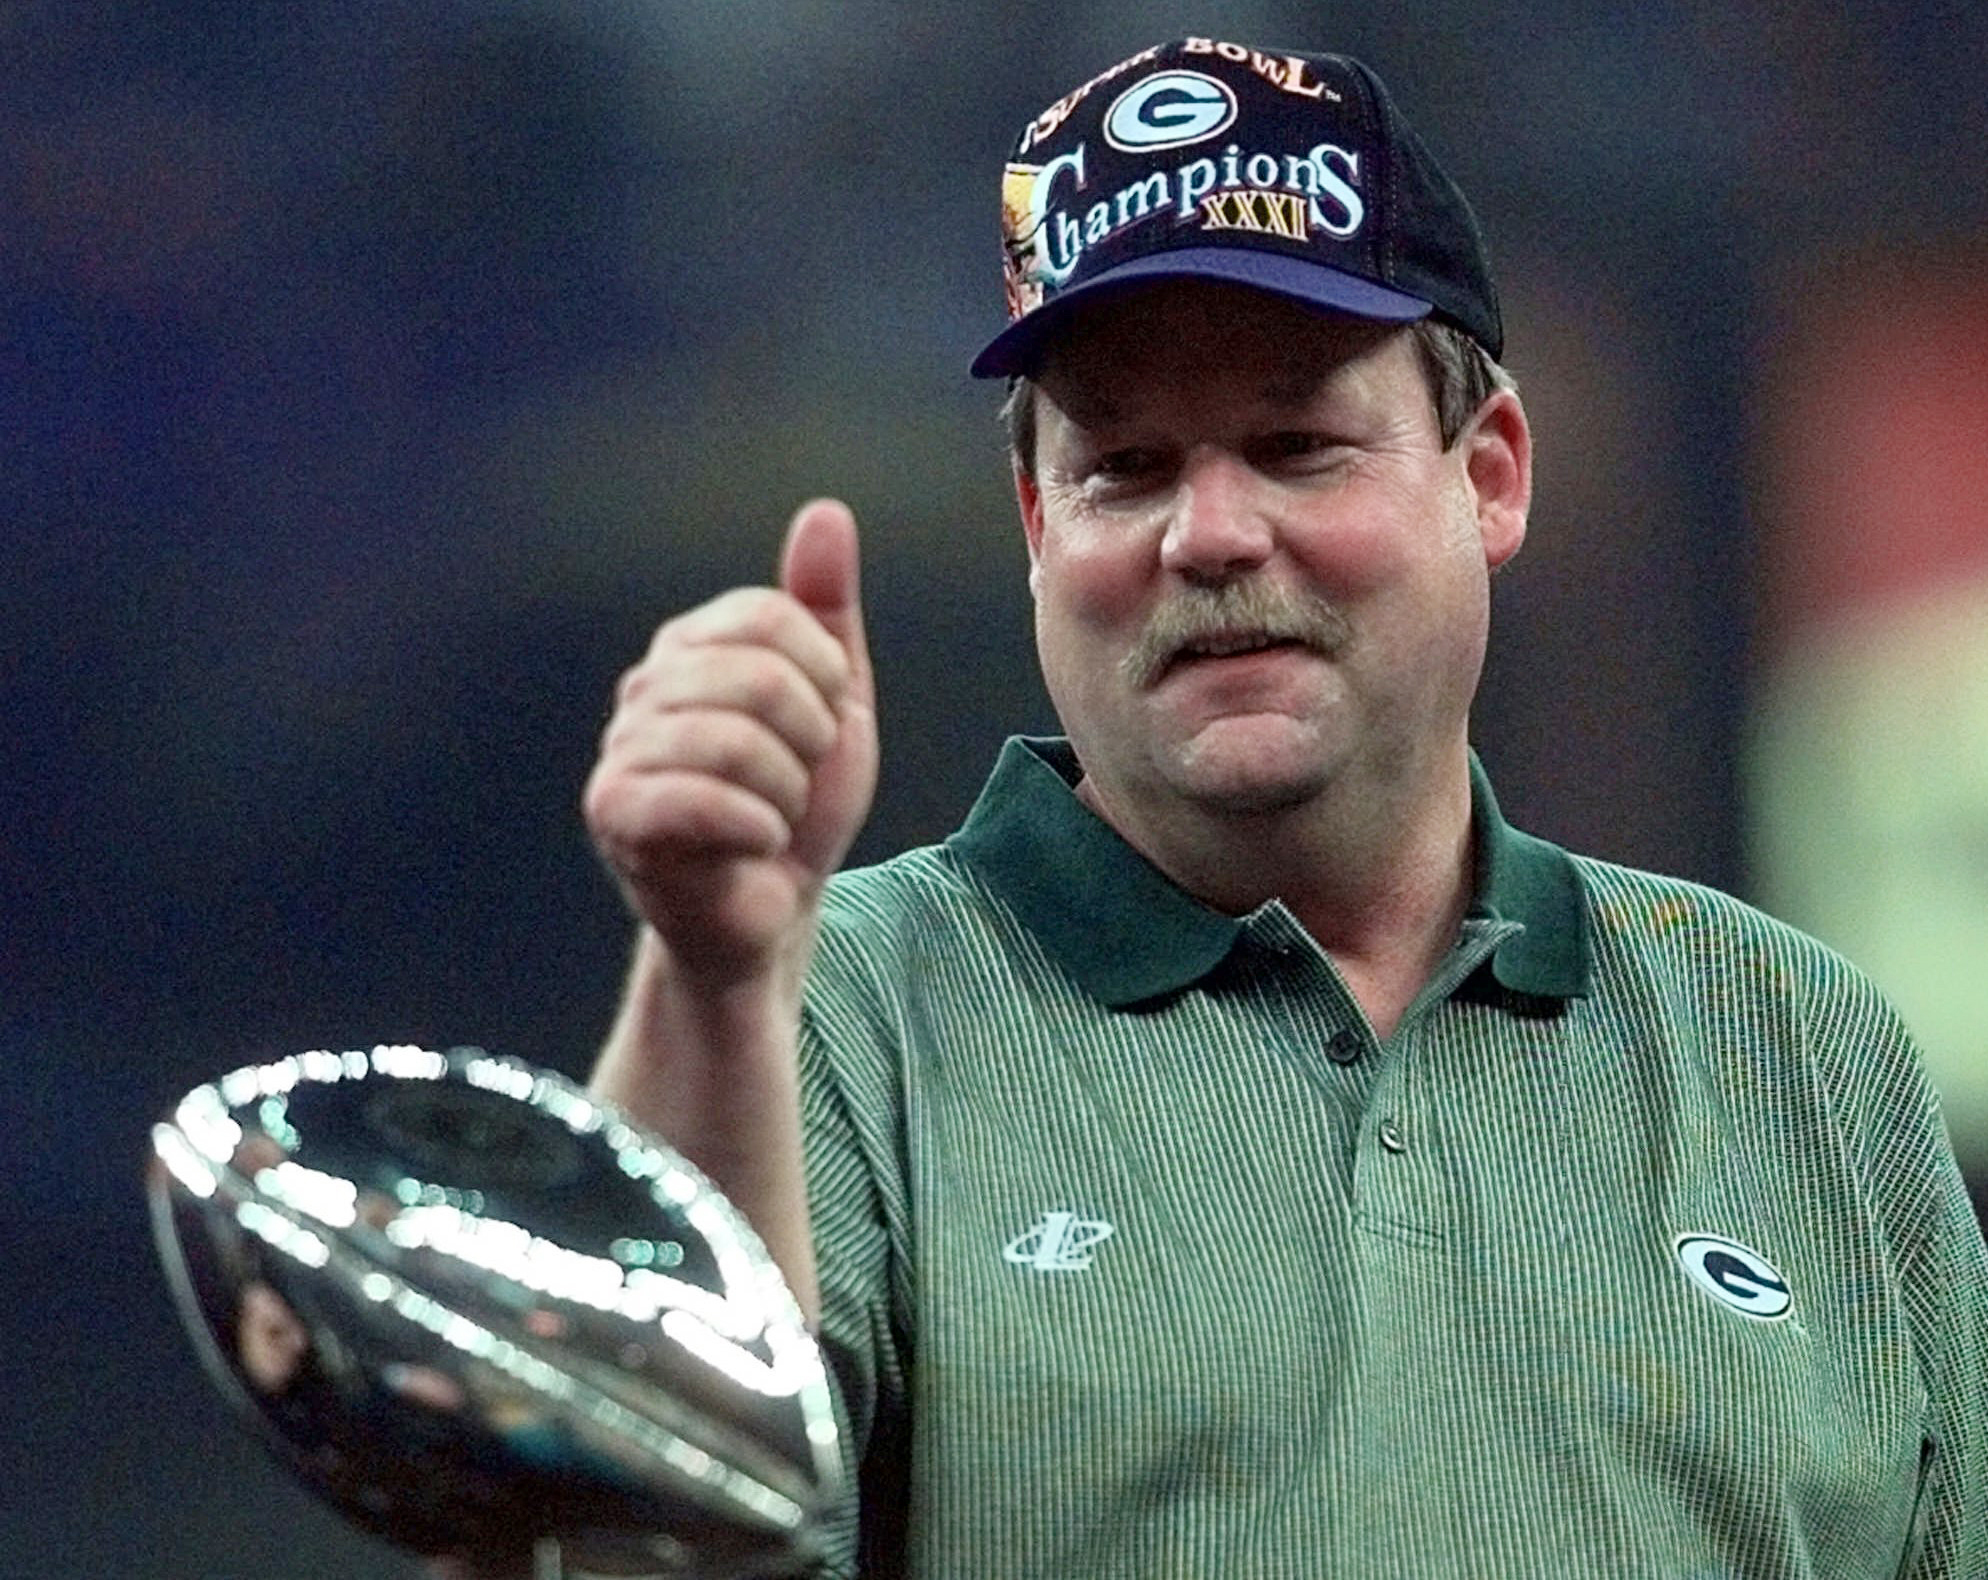 5 Super BowlWinning Coaches Are Finalists For The Pro Football Hall of